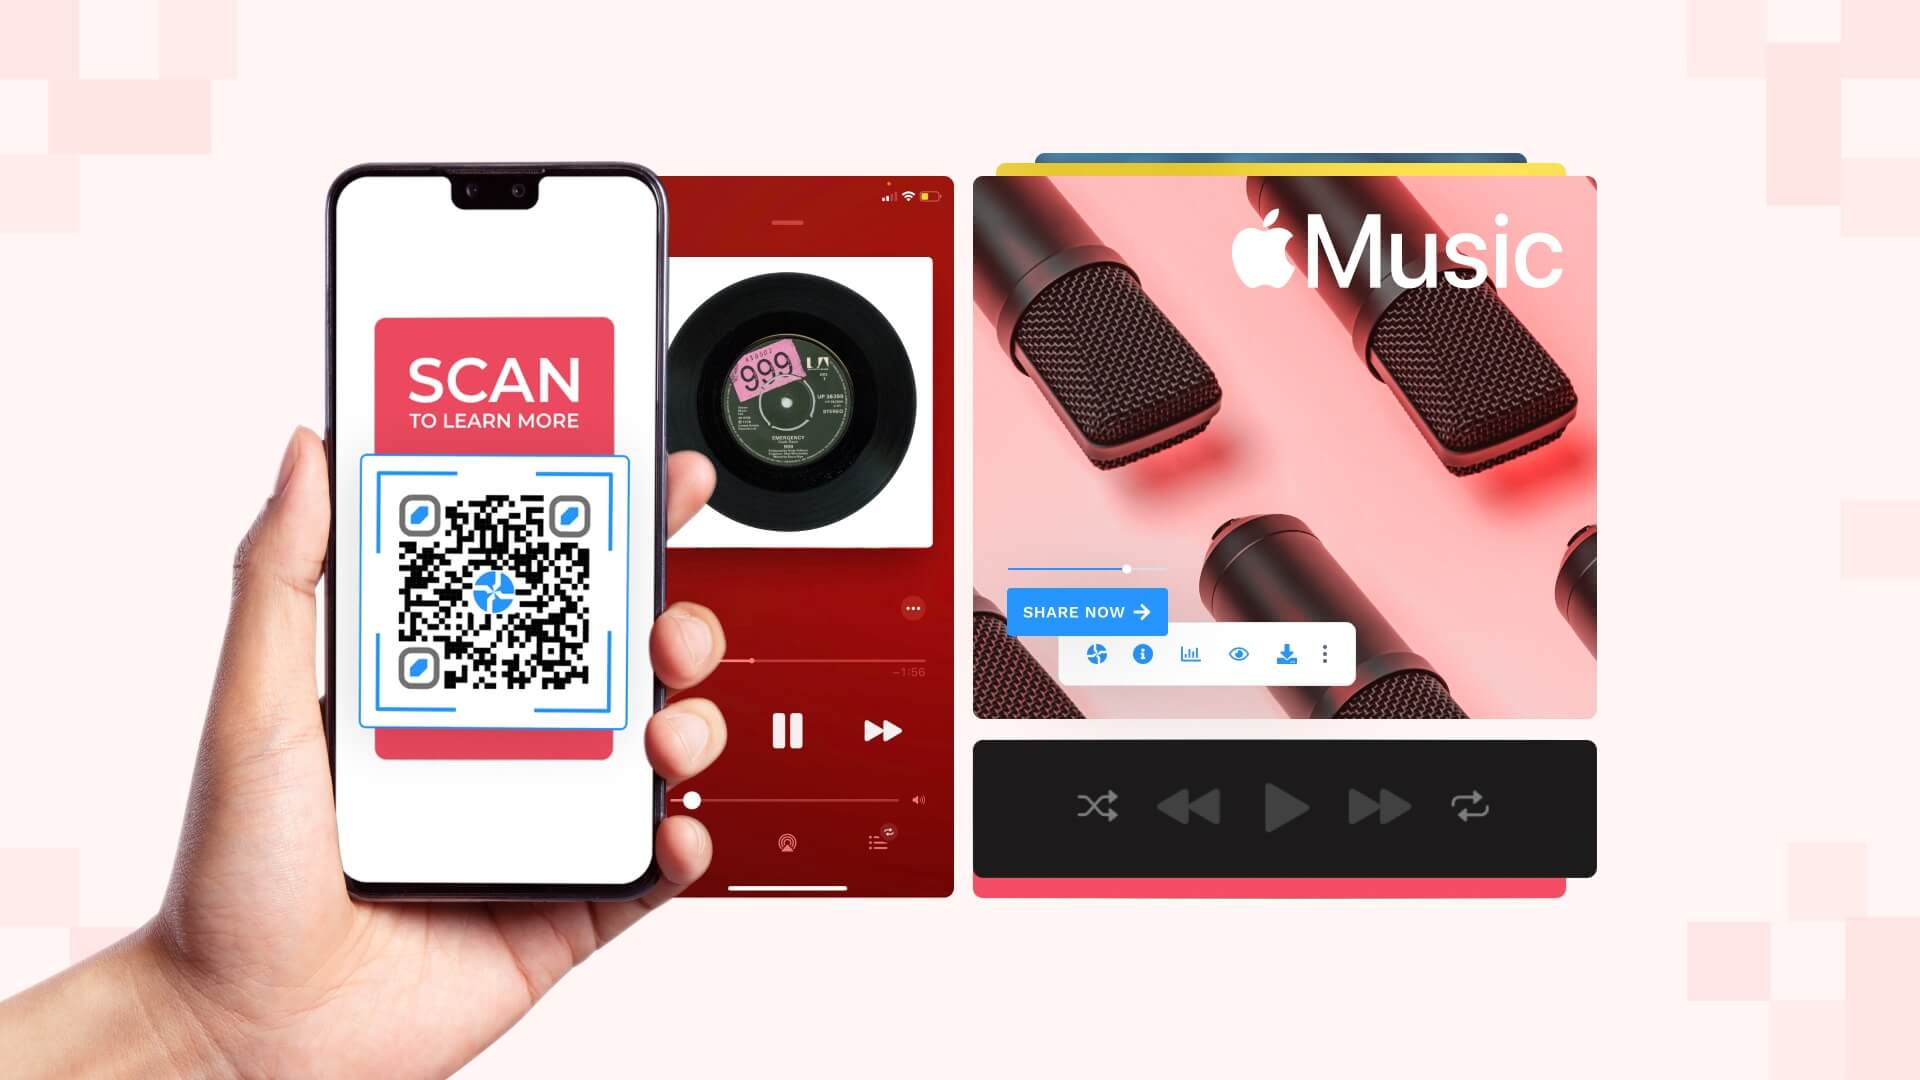 Apple Music QR Code: Share music and boost revenue